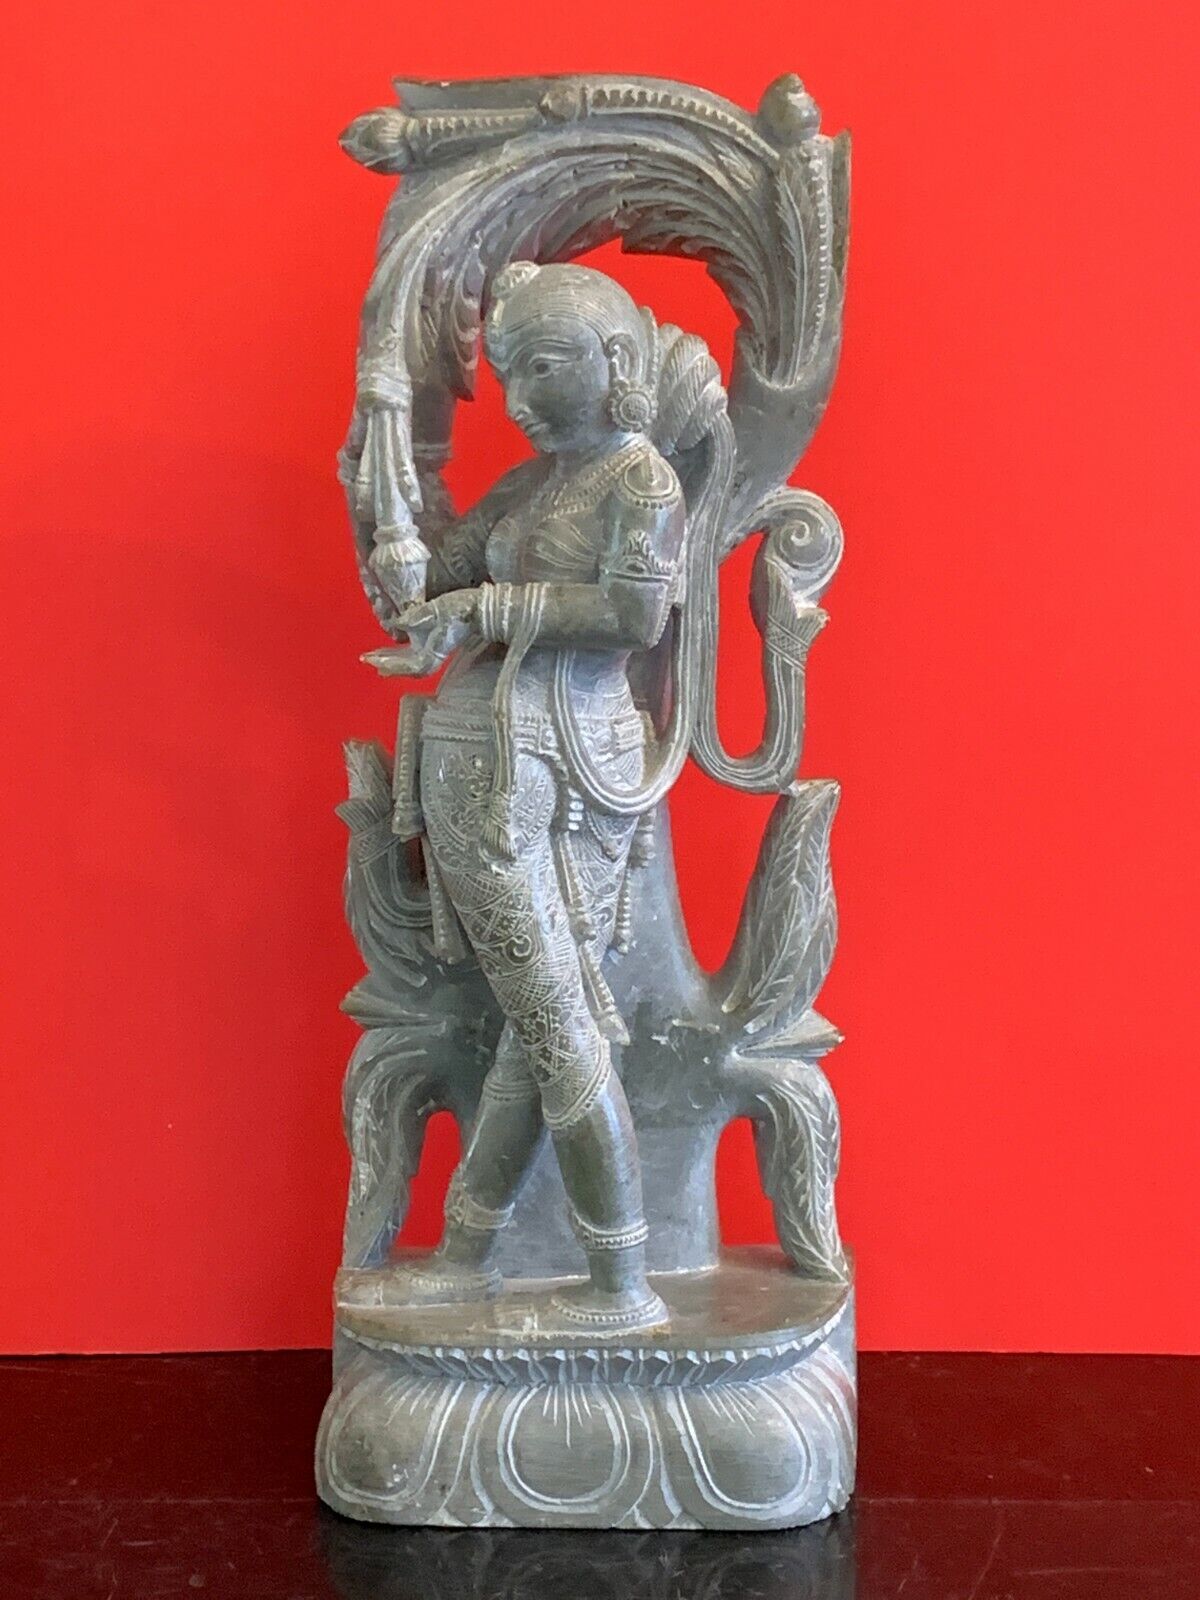 Stunning Stone Carving Statue of a Standing Hindu Female God Parvati or Goddess